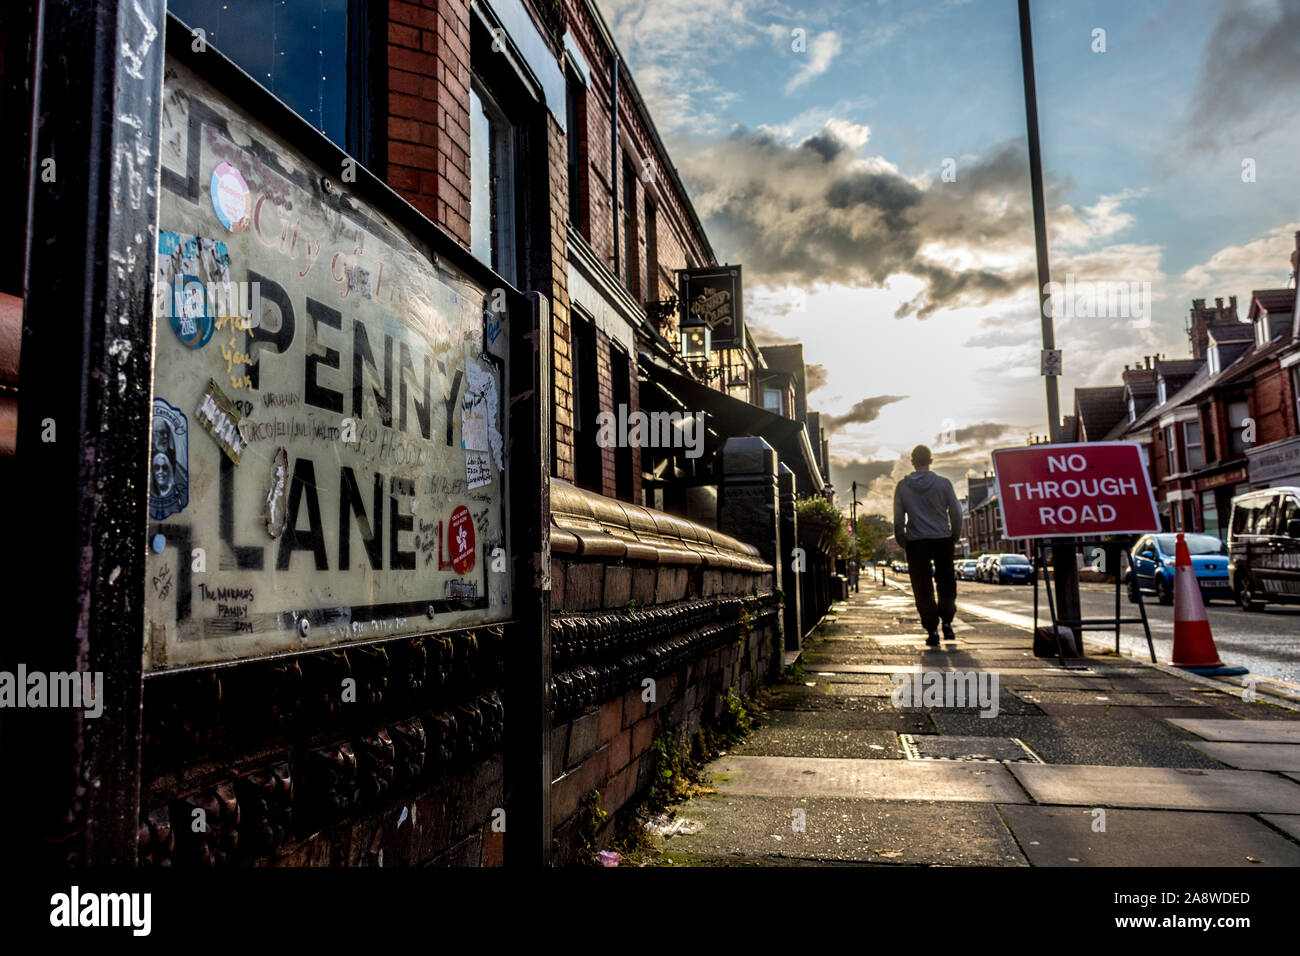 Penny Lane sign, Liverpool, UK. The street made famous in The Beatles song. Stock Photo